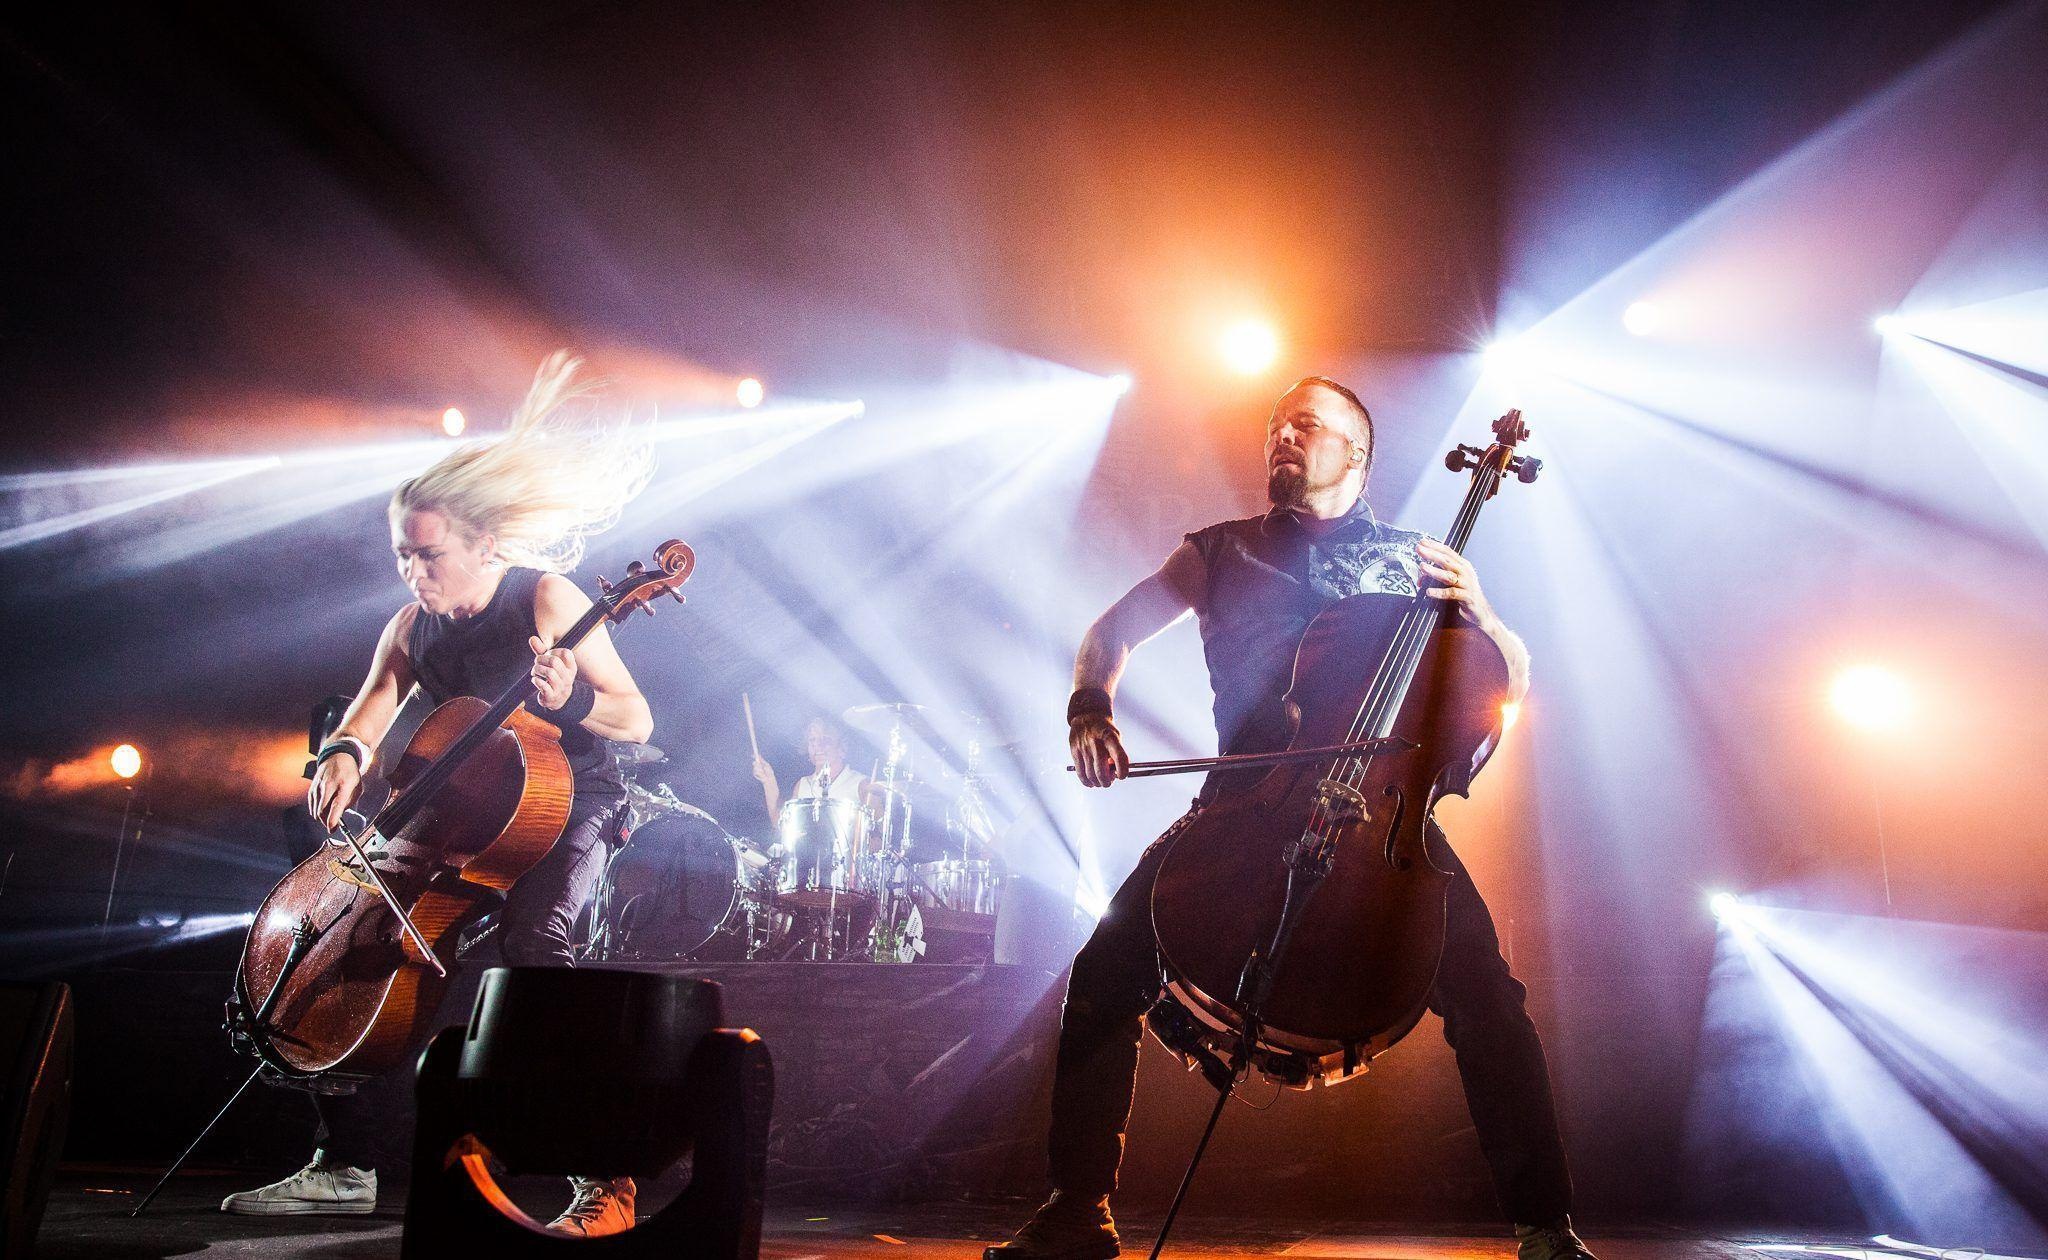 Apocalyptica music, HD wallpapers, Rock music backgrounds, Captivating visuals, 2050x1260 HD Desktop